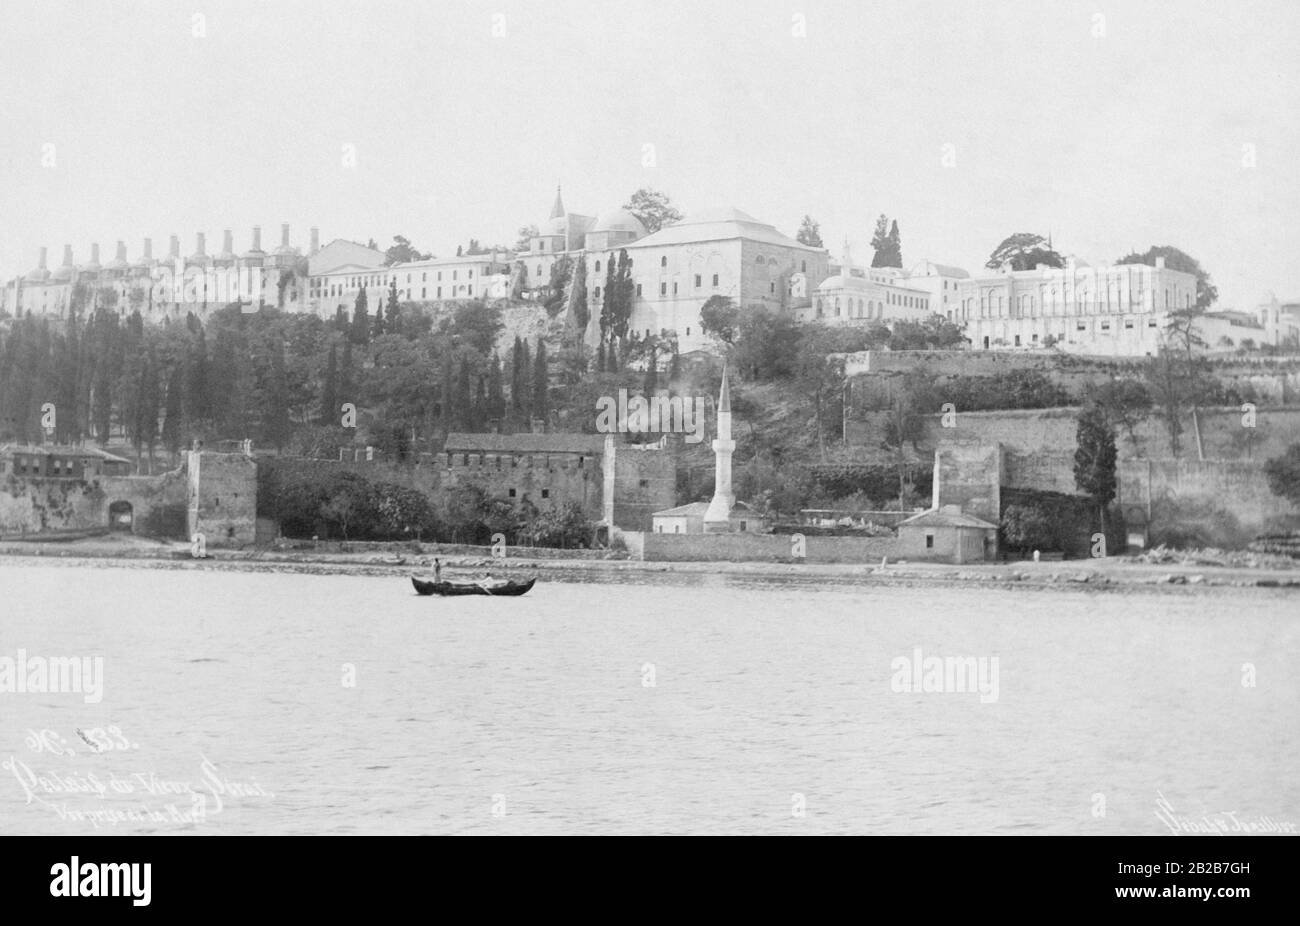 The Topkapi Palace in Istanbul, where the Ottoman sultans used to live and where the centre of the Ottoman administration was located. The photo is undated. Stock Photo